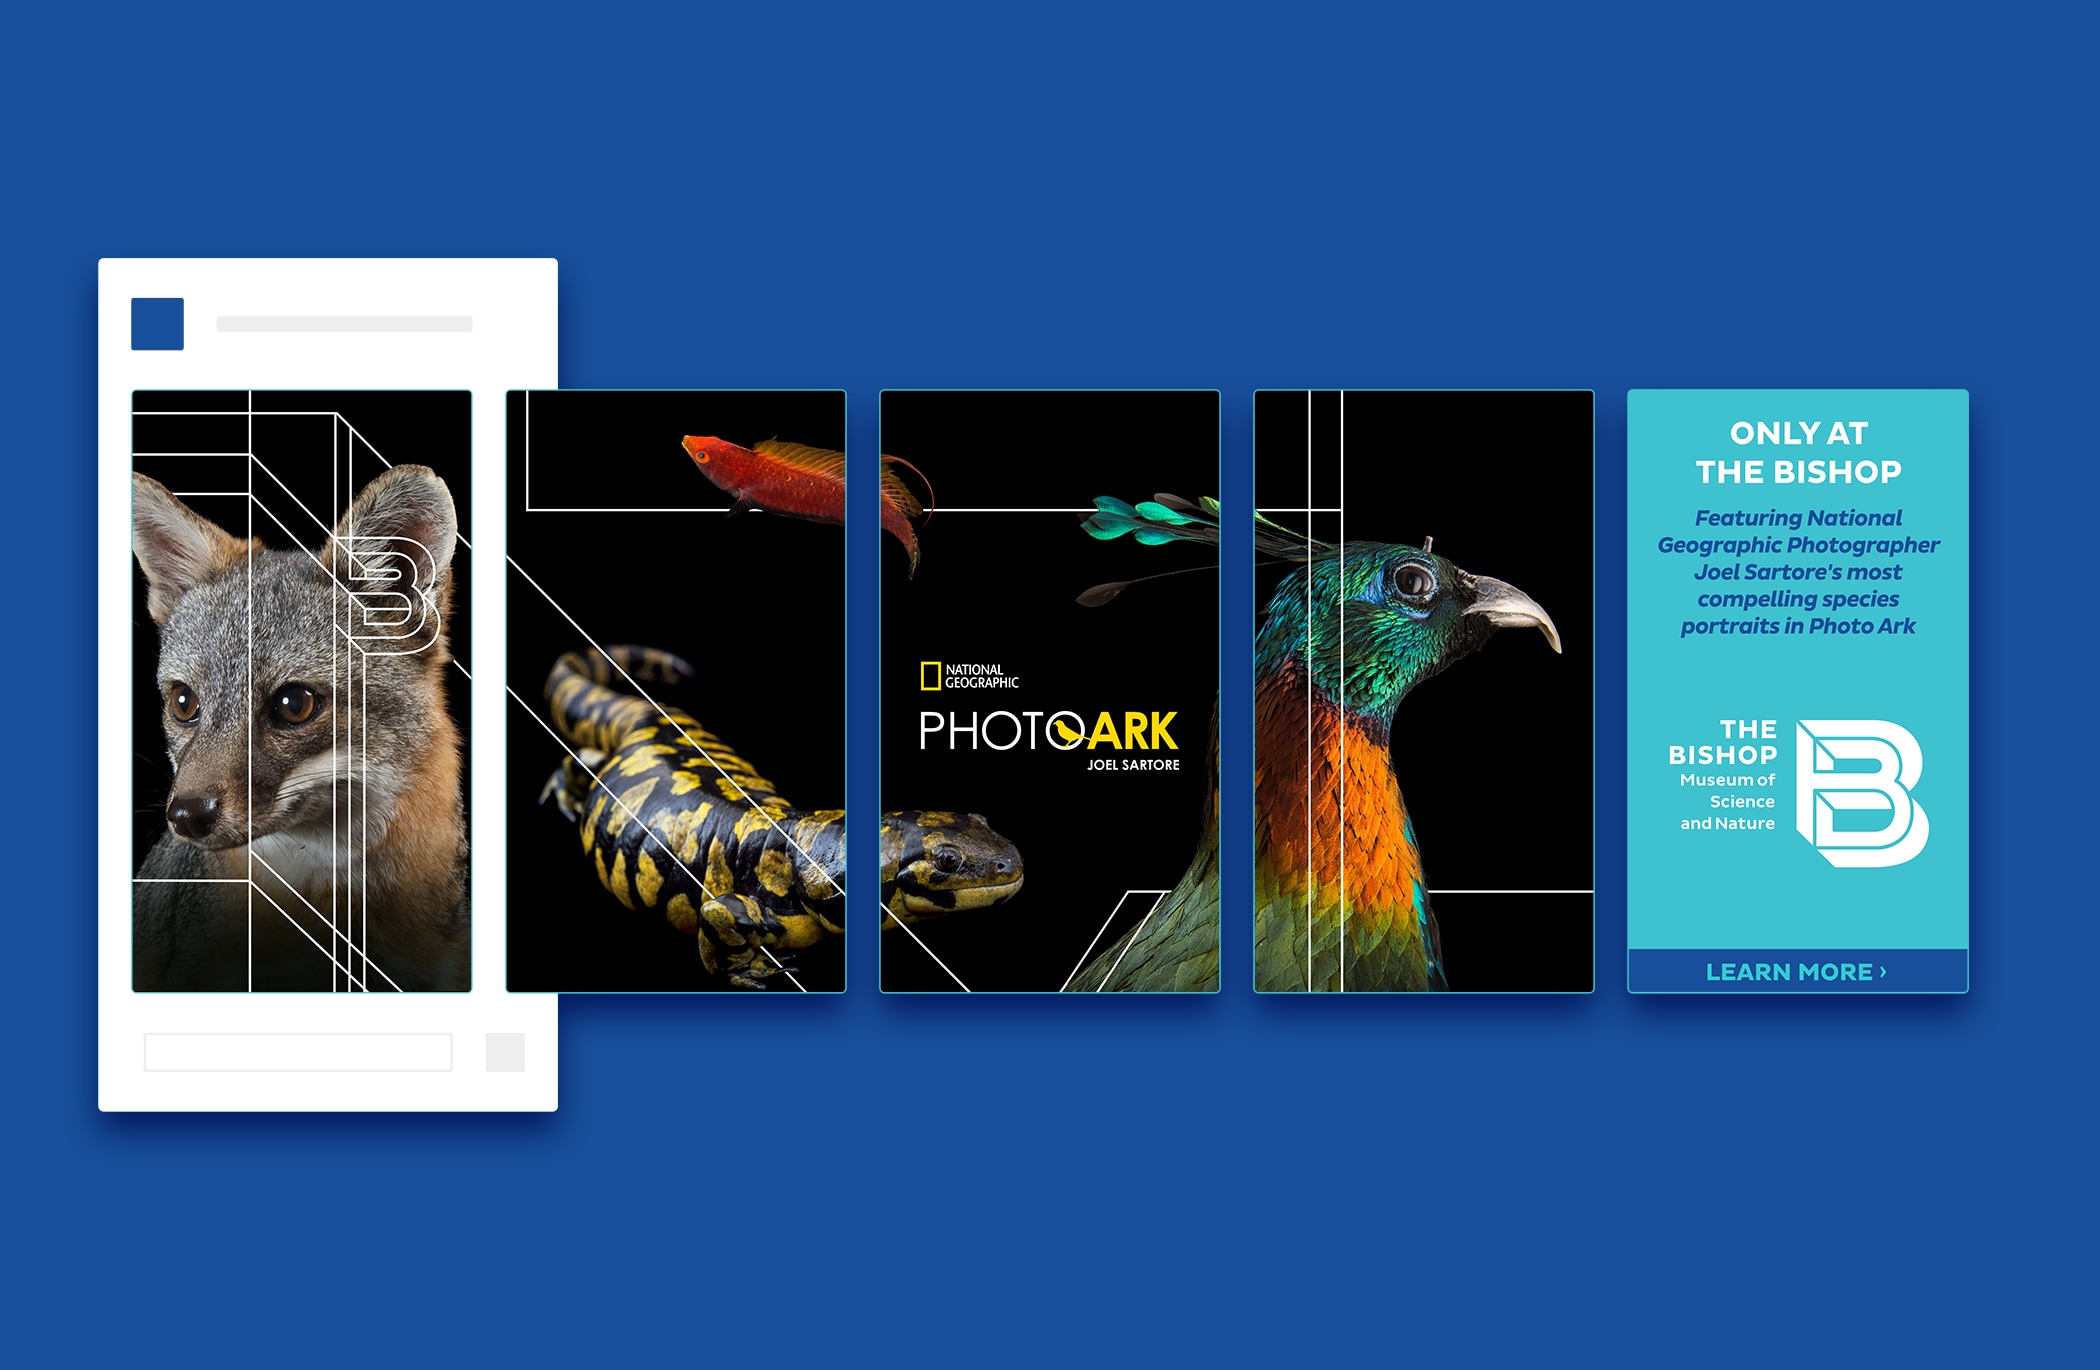 Social Media Carousel for the Bishop Museum promoting National Geographic Photo Ark event